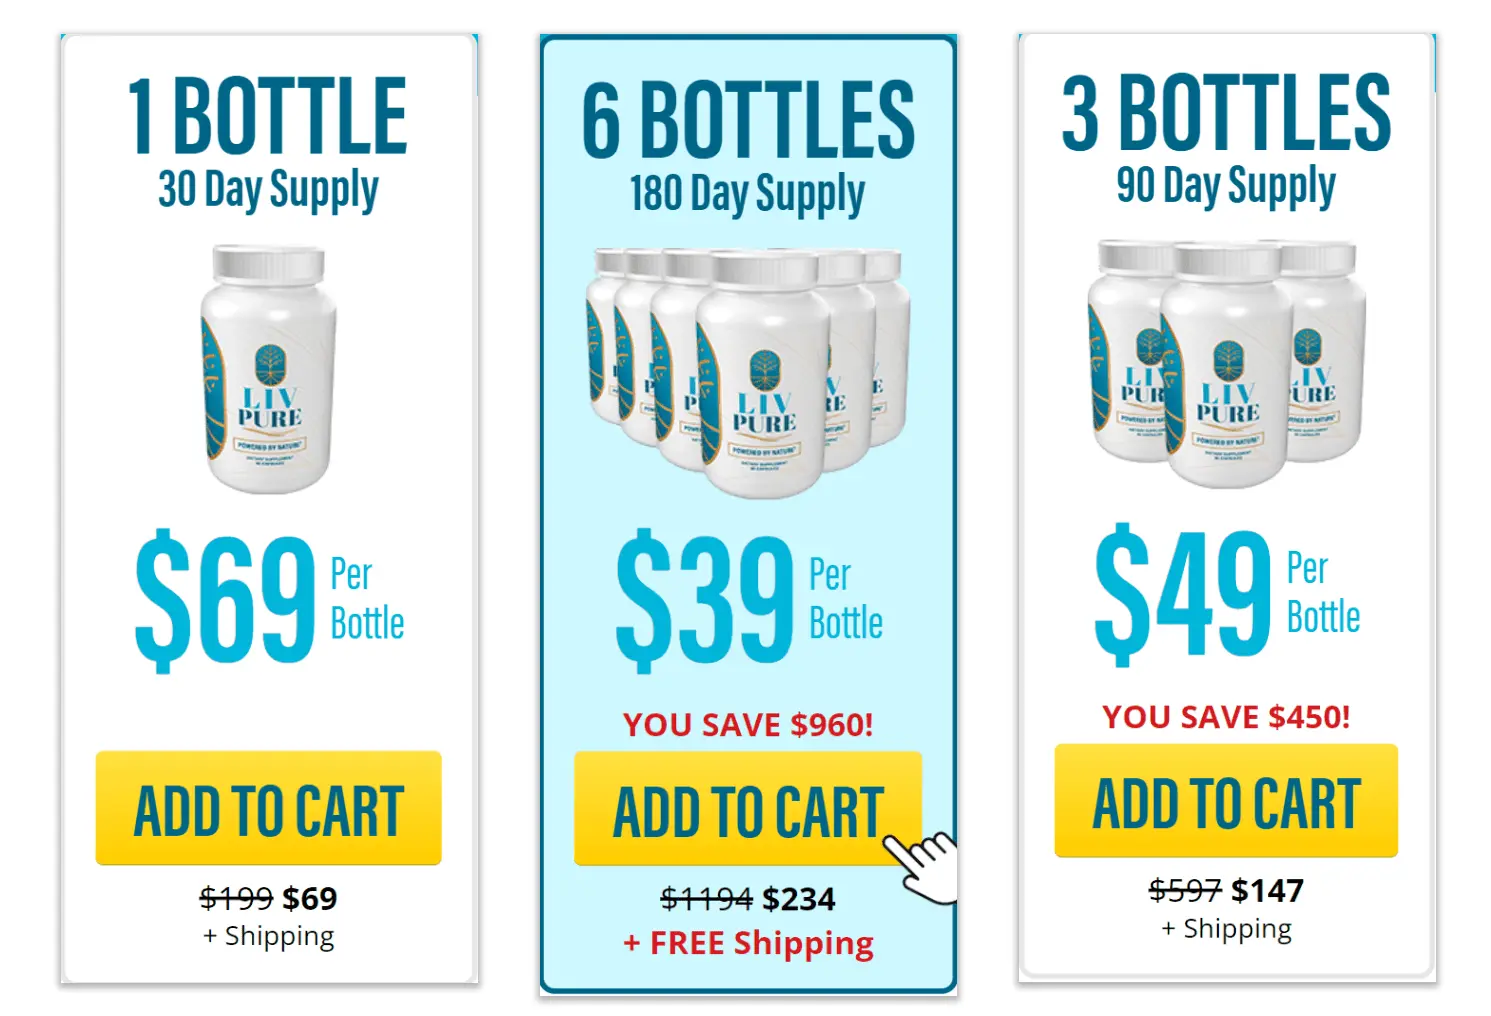 liv pure bottle pricing